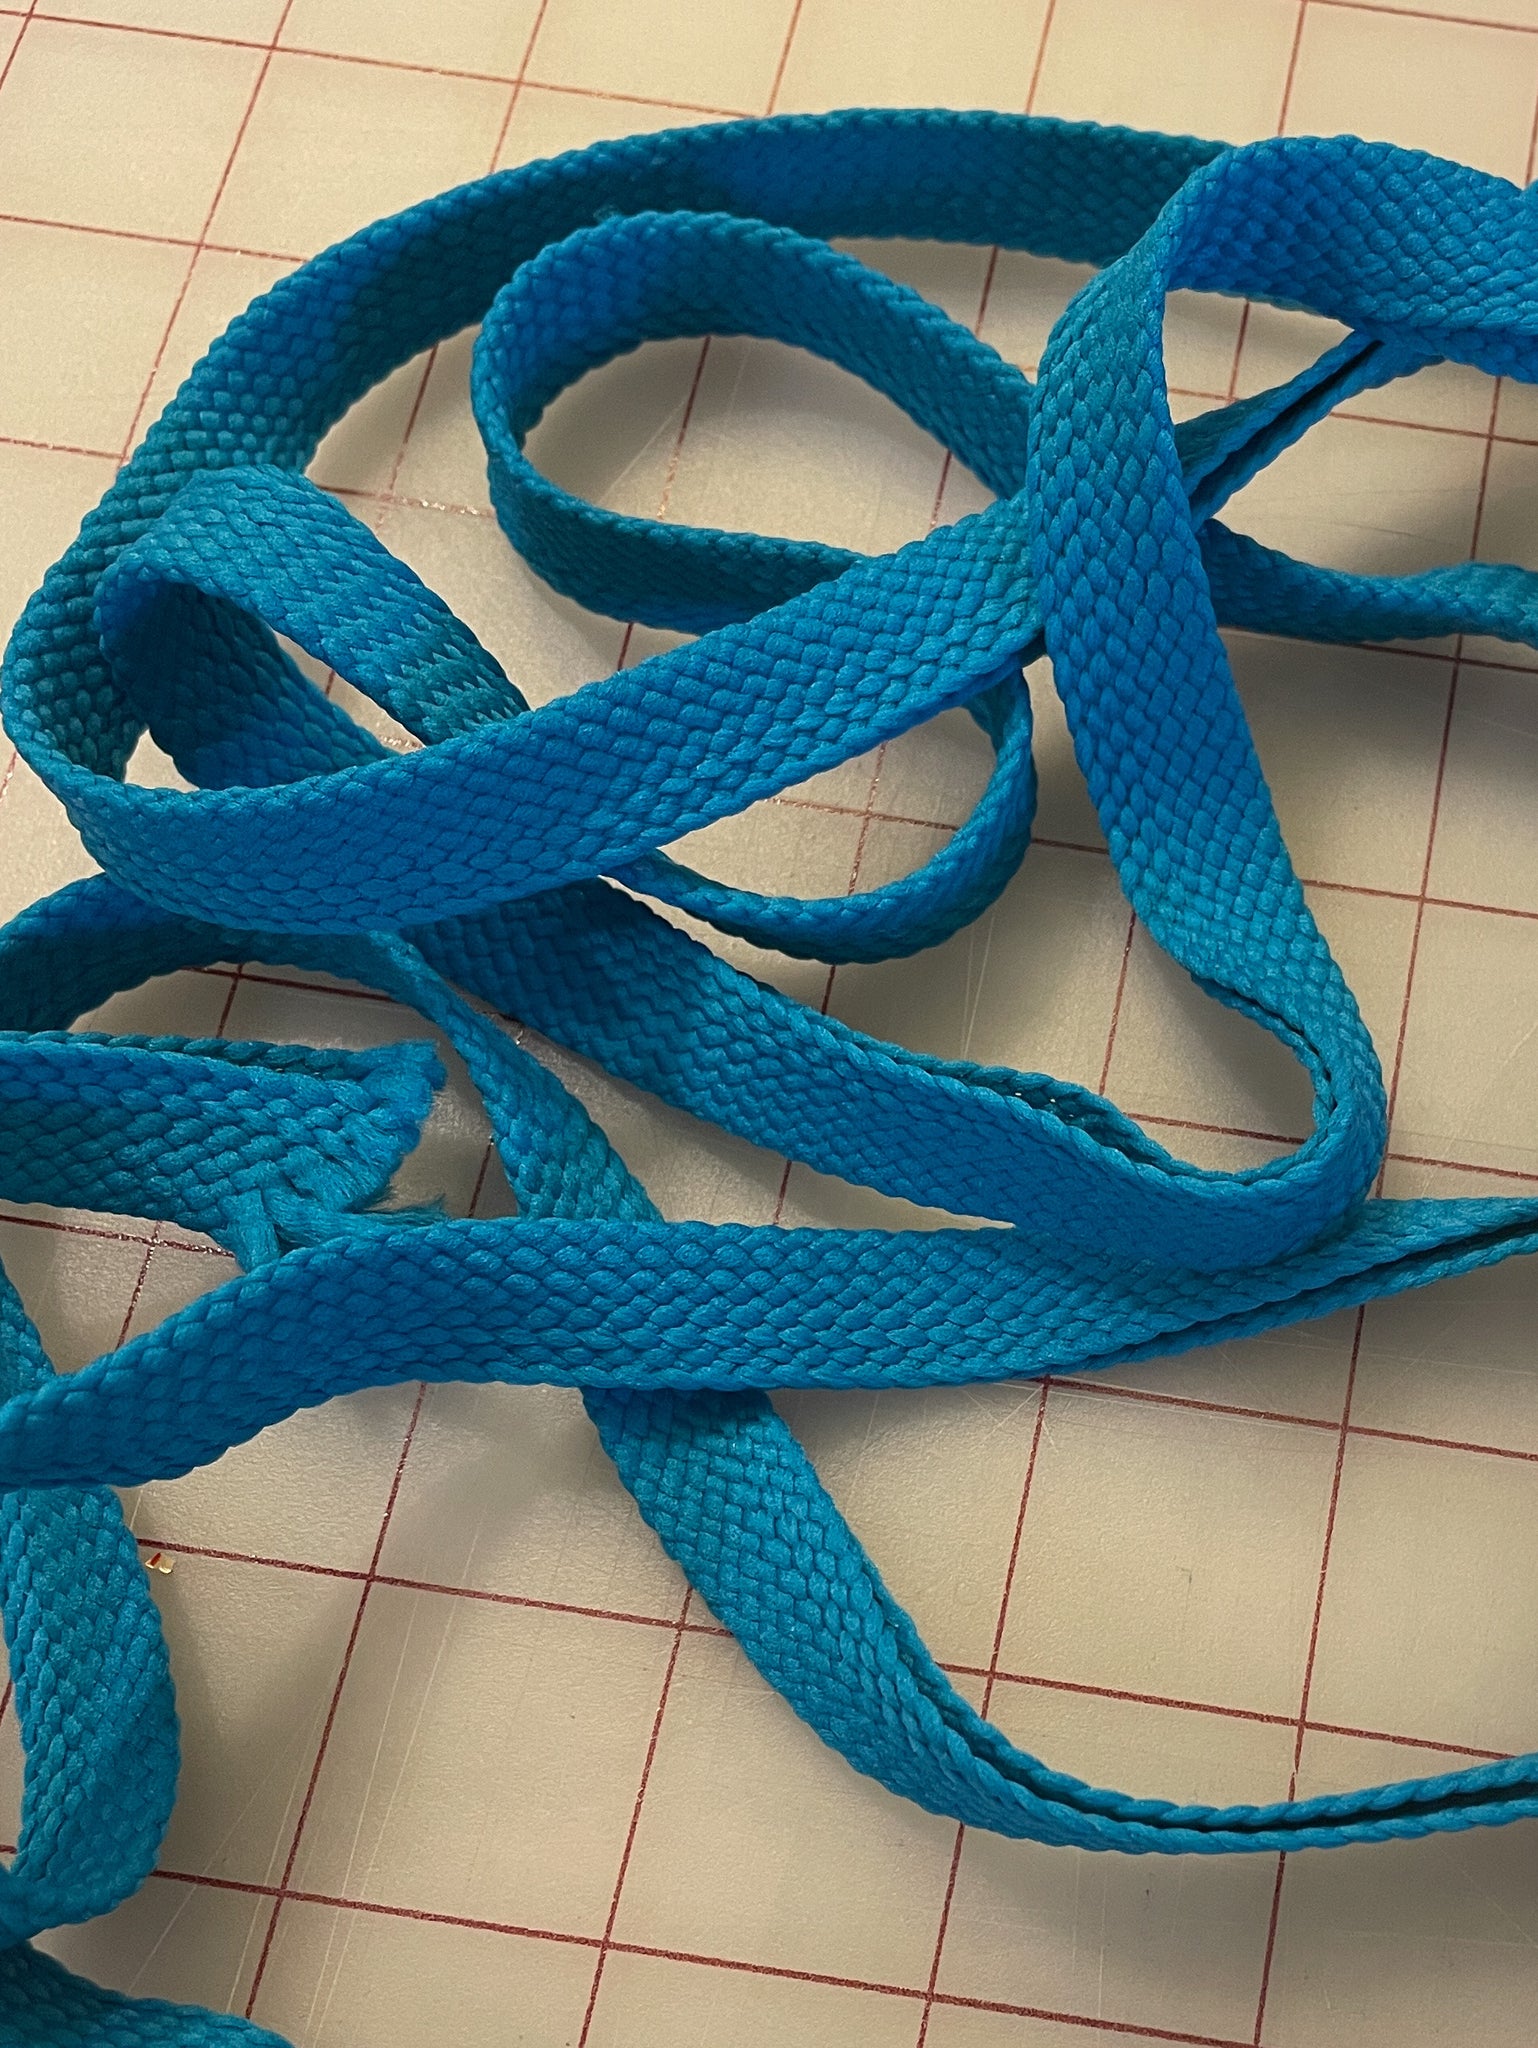 SALE 2 2/3 YD Braid Binding By the Yard Vintage Polyester - Turquoise